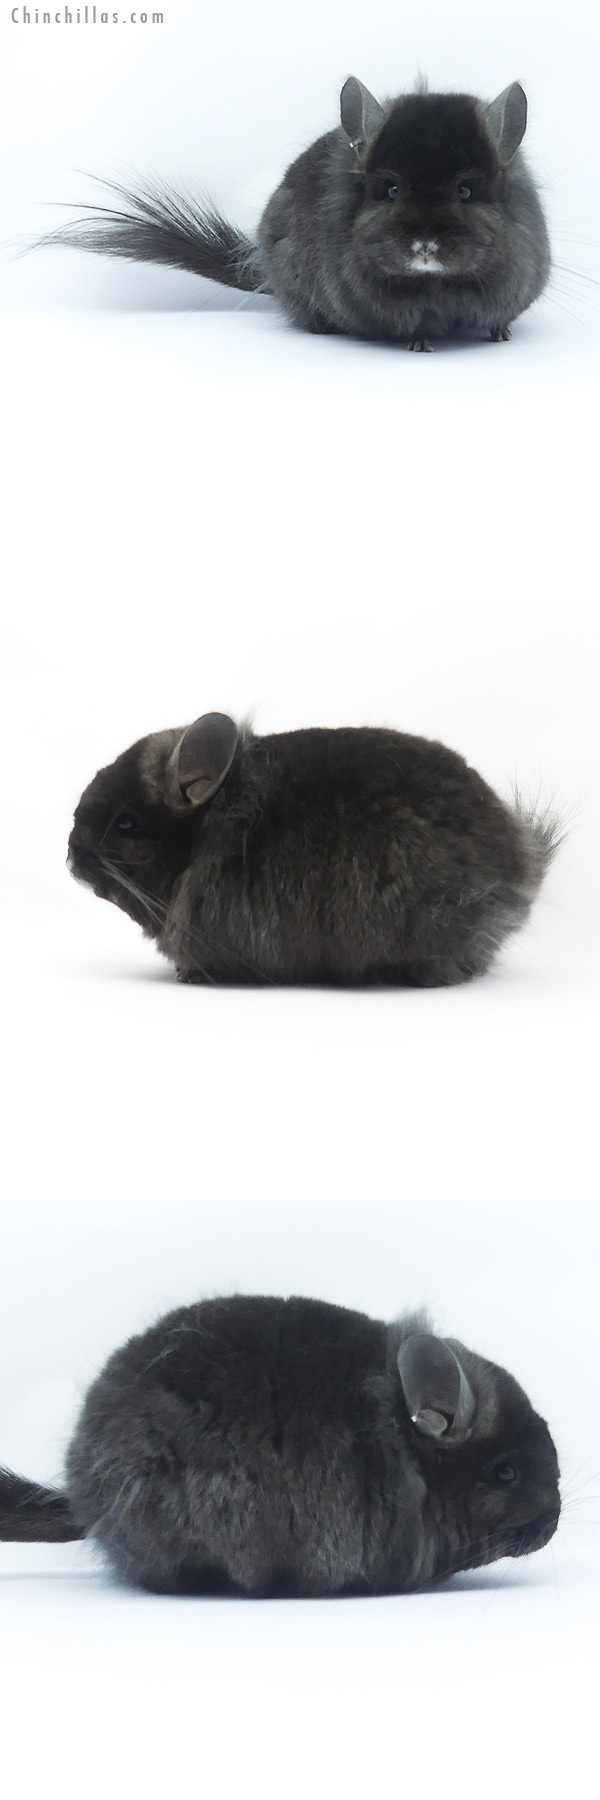 Chinchilla or related item offered for sale or export on Chinchillas.com - 19390 Exceptional Ebony ( Locken Carrier )  Royal Persian Angora Female Chinchilla